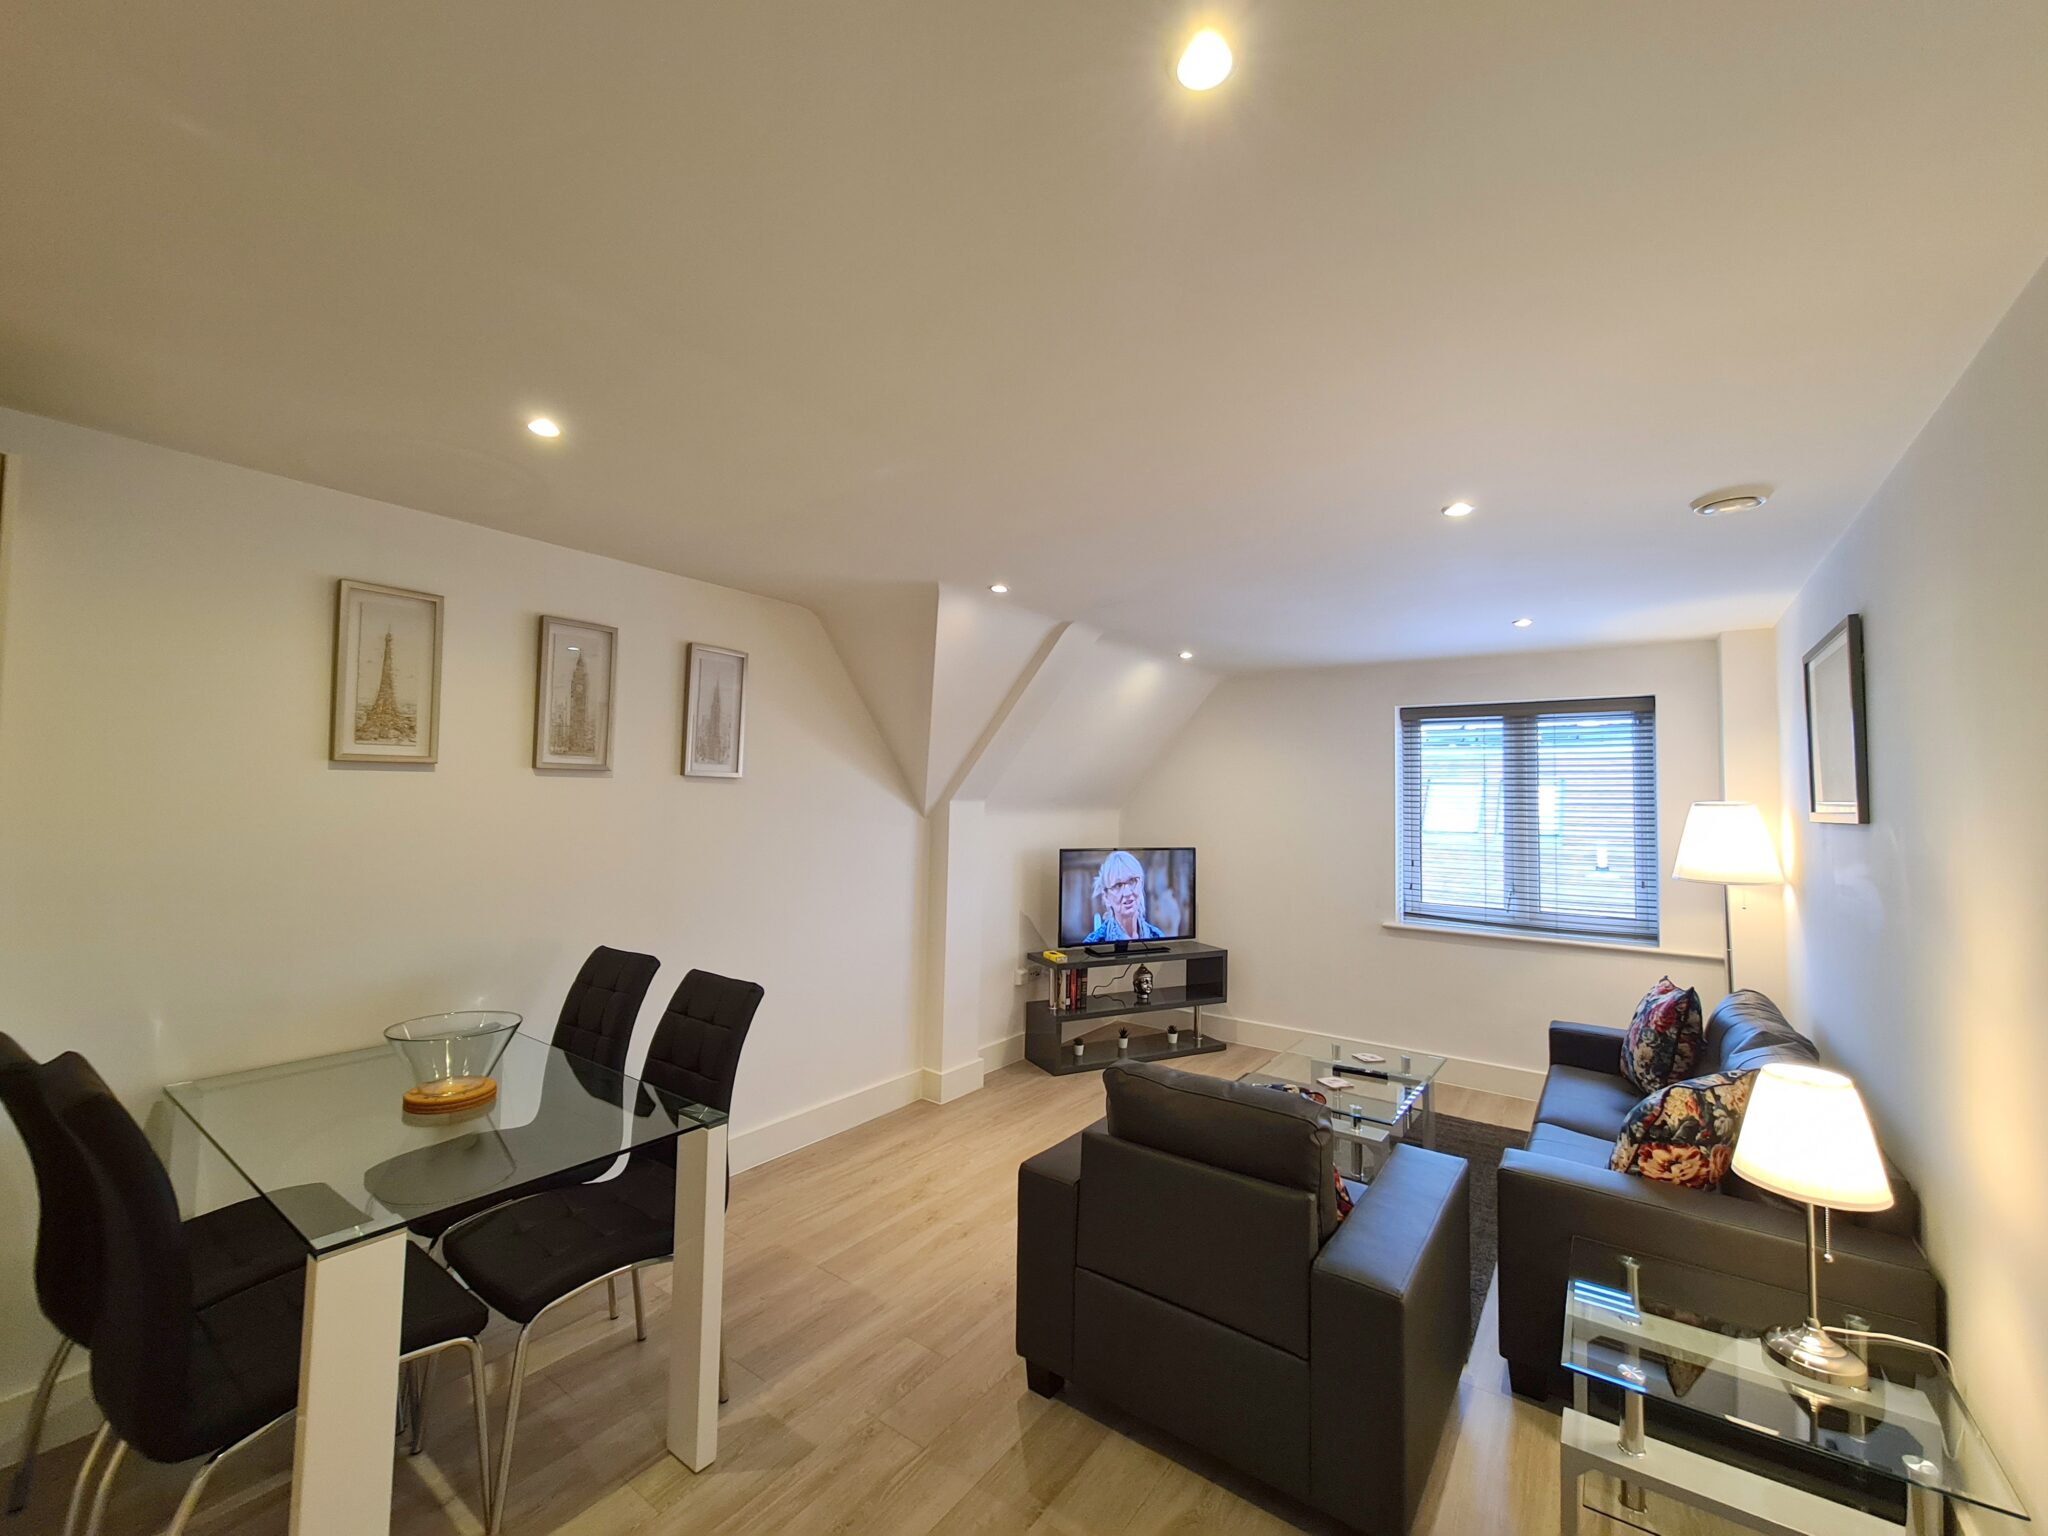 Book-our-Serviced-Apartments-in-Ruislip-for-one-week-or-one-month!-This-accommodation-in-West-London-is-ideal-for-business-&-leisure-guests!-Urban-Stay